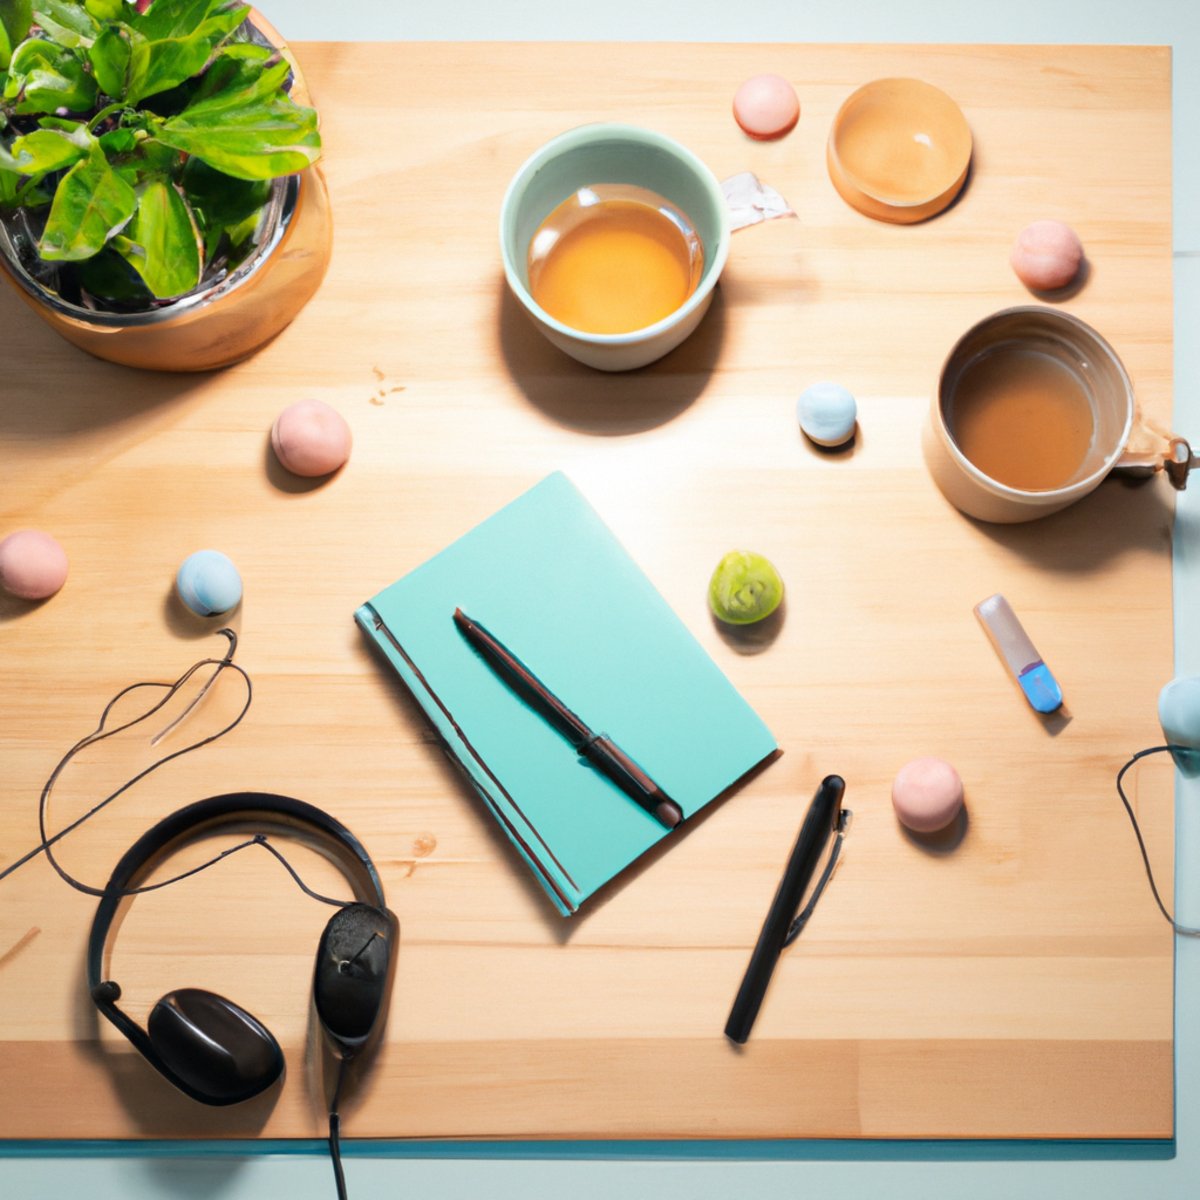 Organized desk with tea, notebook, stress ball, headphones, and plant, promoting effective stress management strategies.